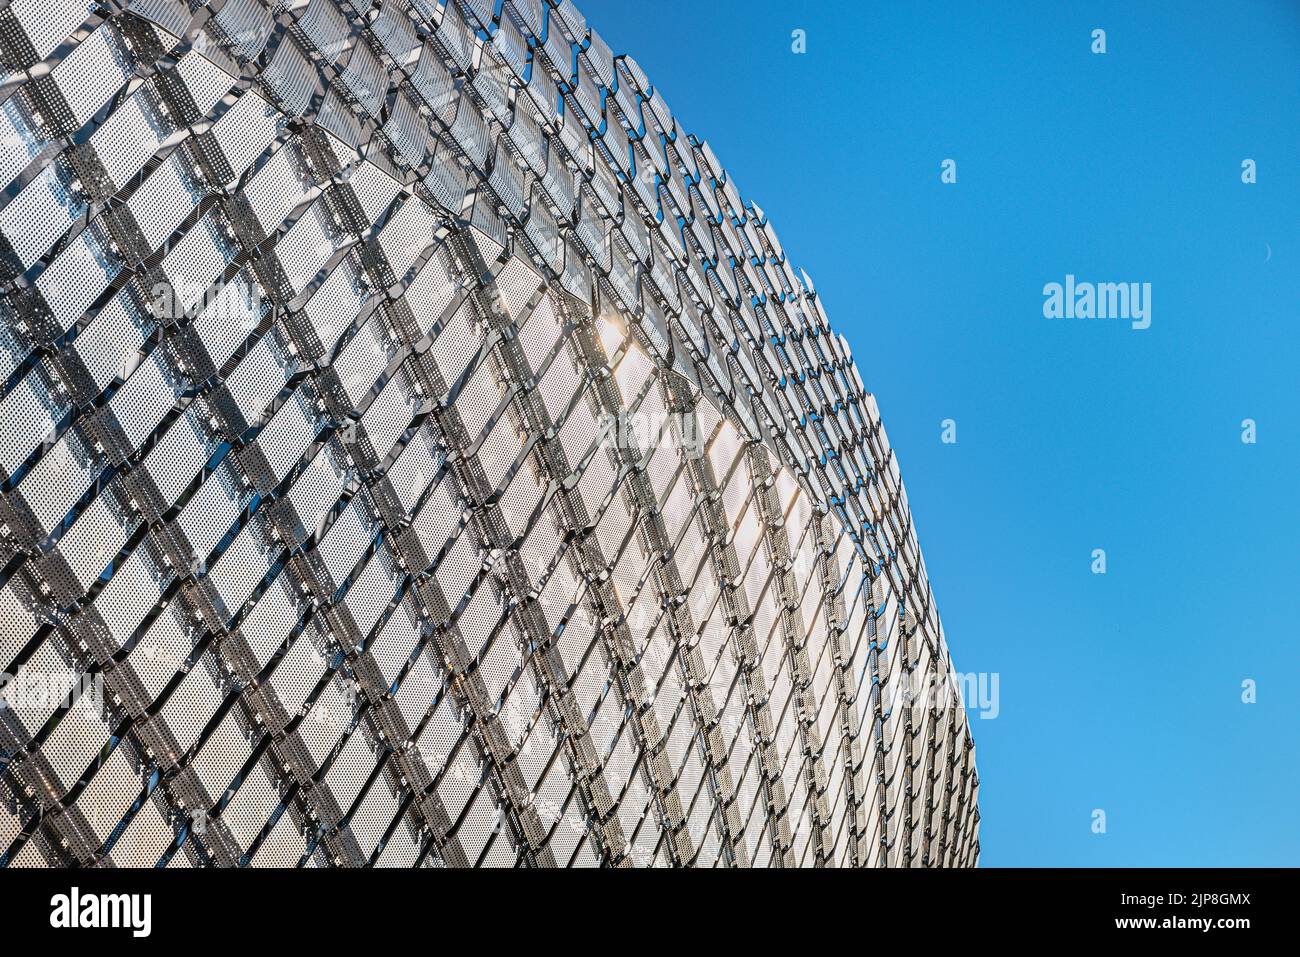 Modern metallic facade detail shows how modern buildings are becoming cold and soulless. Closeup of square shaped panels on a contemporary building Stock Photo